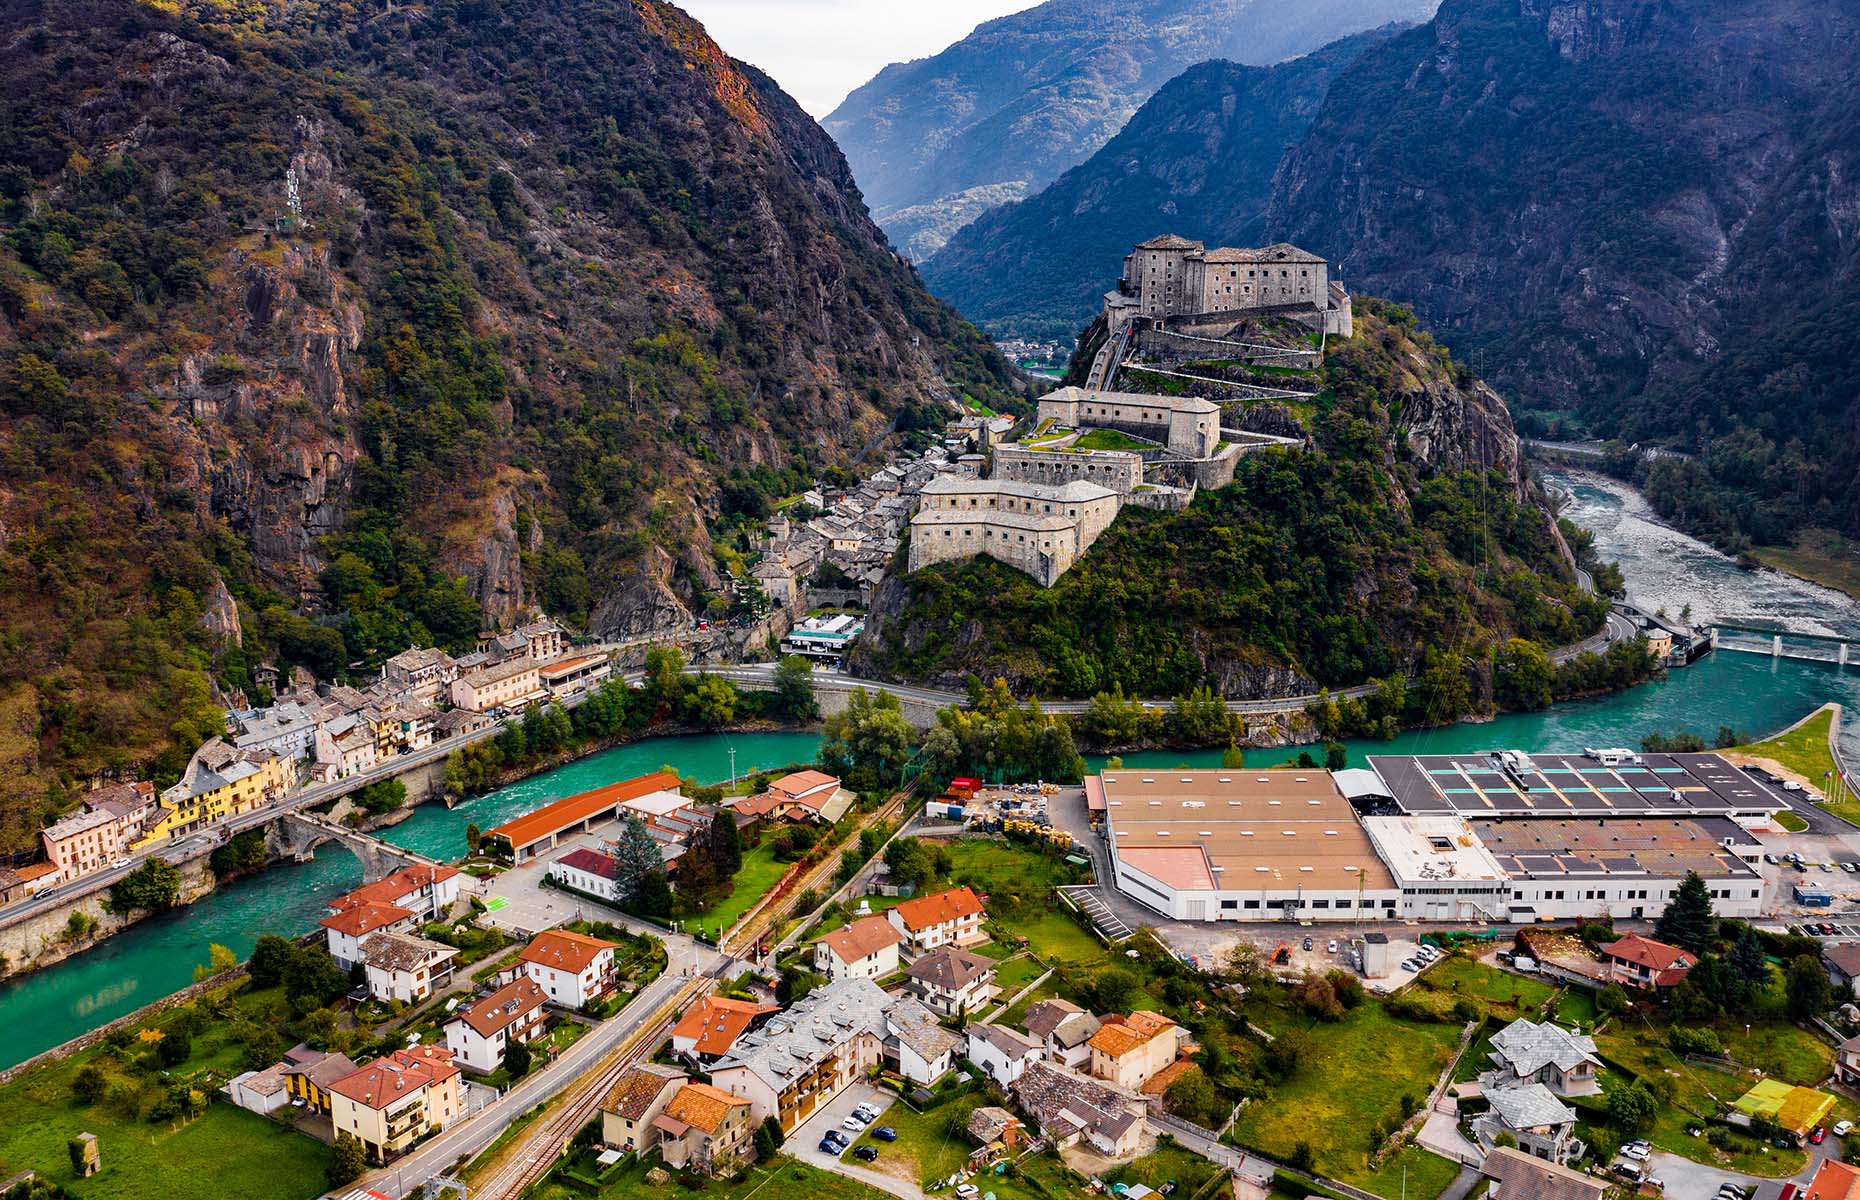 Fort Bard in Aosta Valley (Image: Enrico Pescantini/Shutterstock)